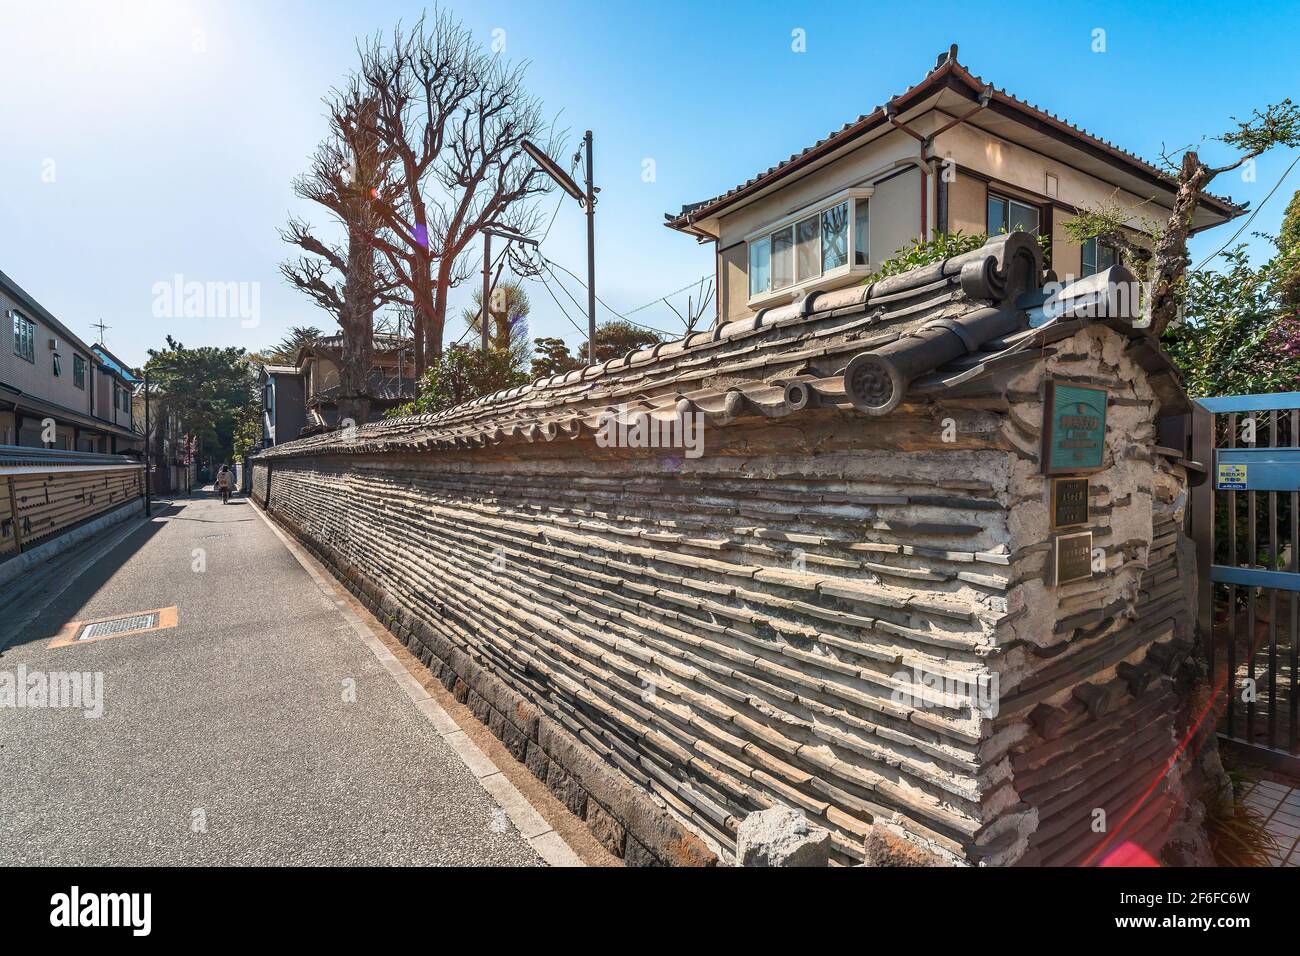 tokyo,japan - march 30 2021: Cob wall called Tuijibei built in a traditional architecture of stacked roof tiles typical of Edo era and classified as c Stock Photo